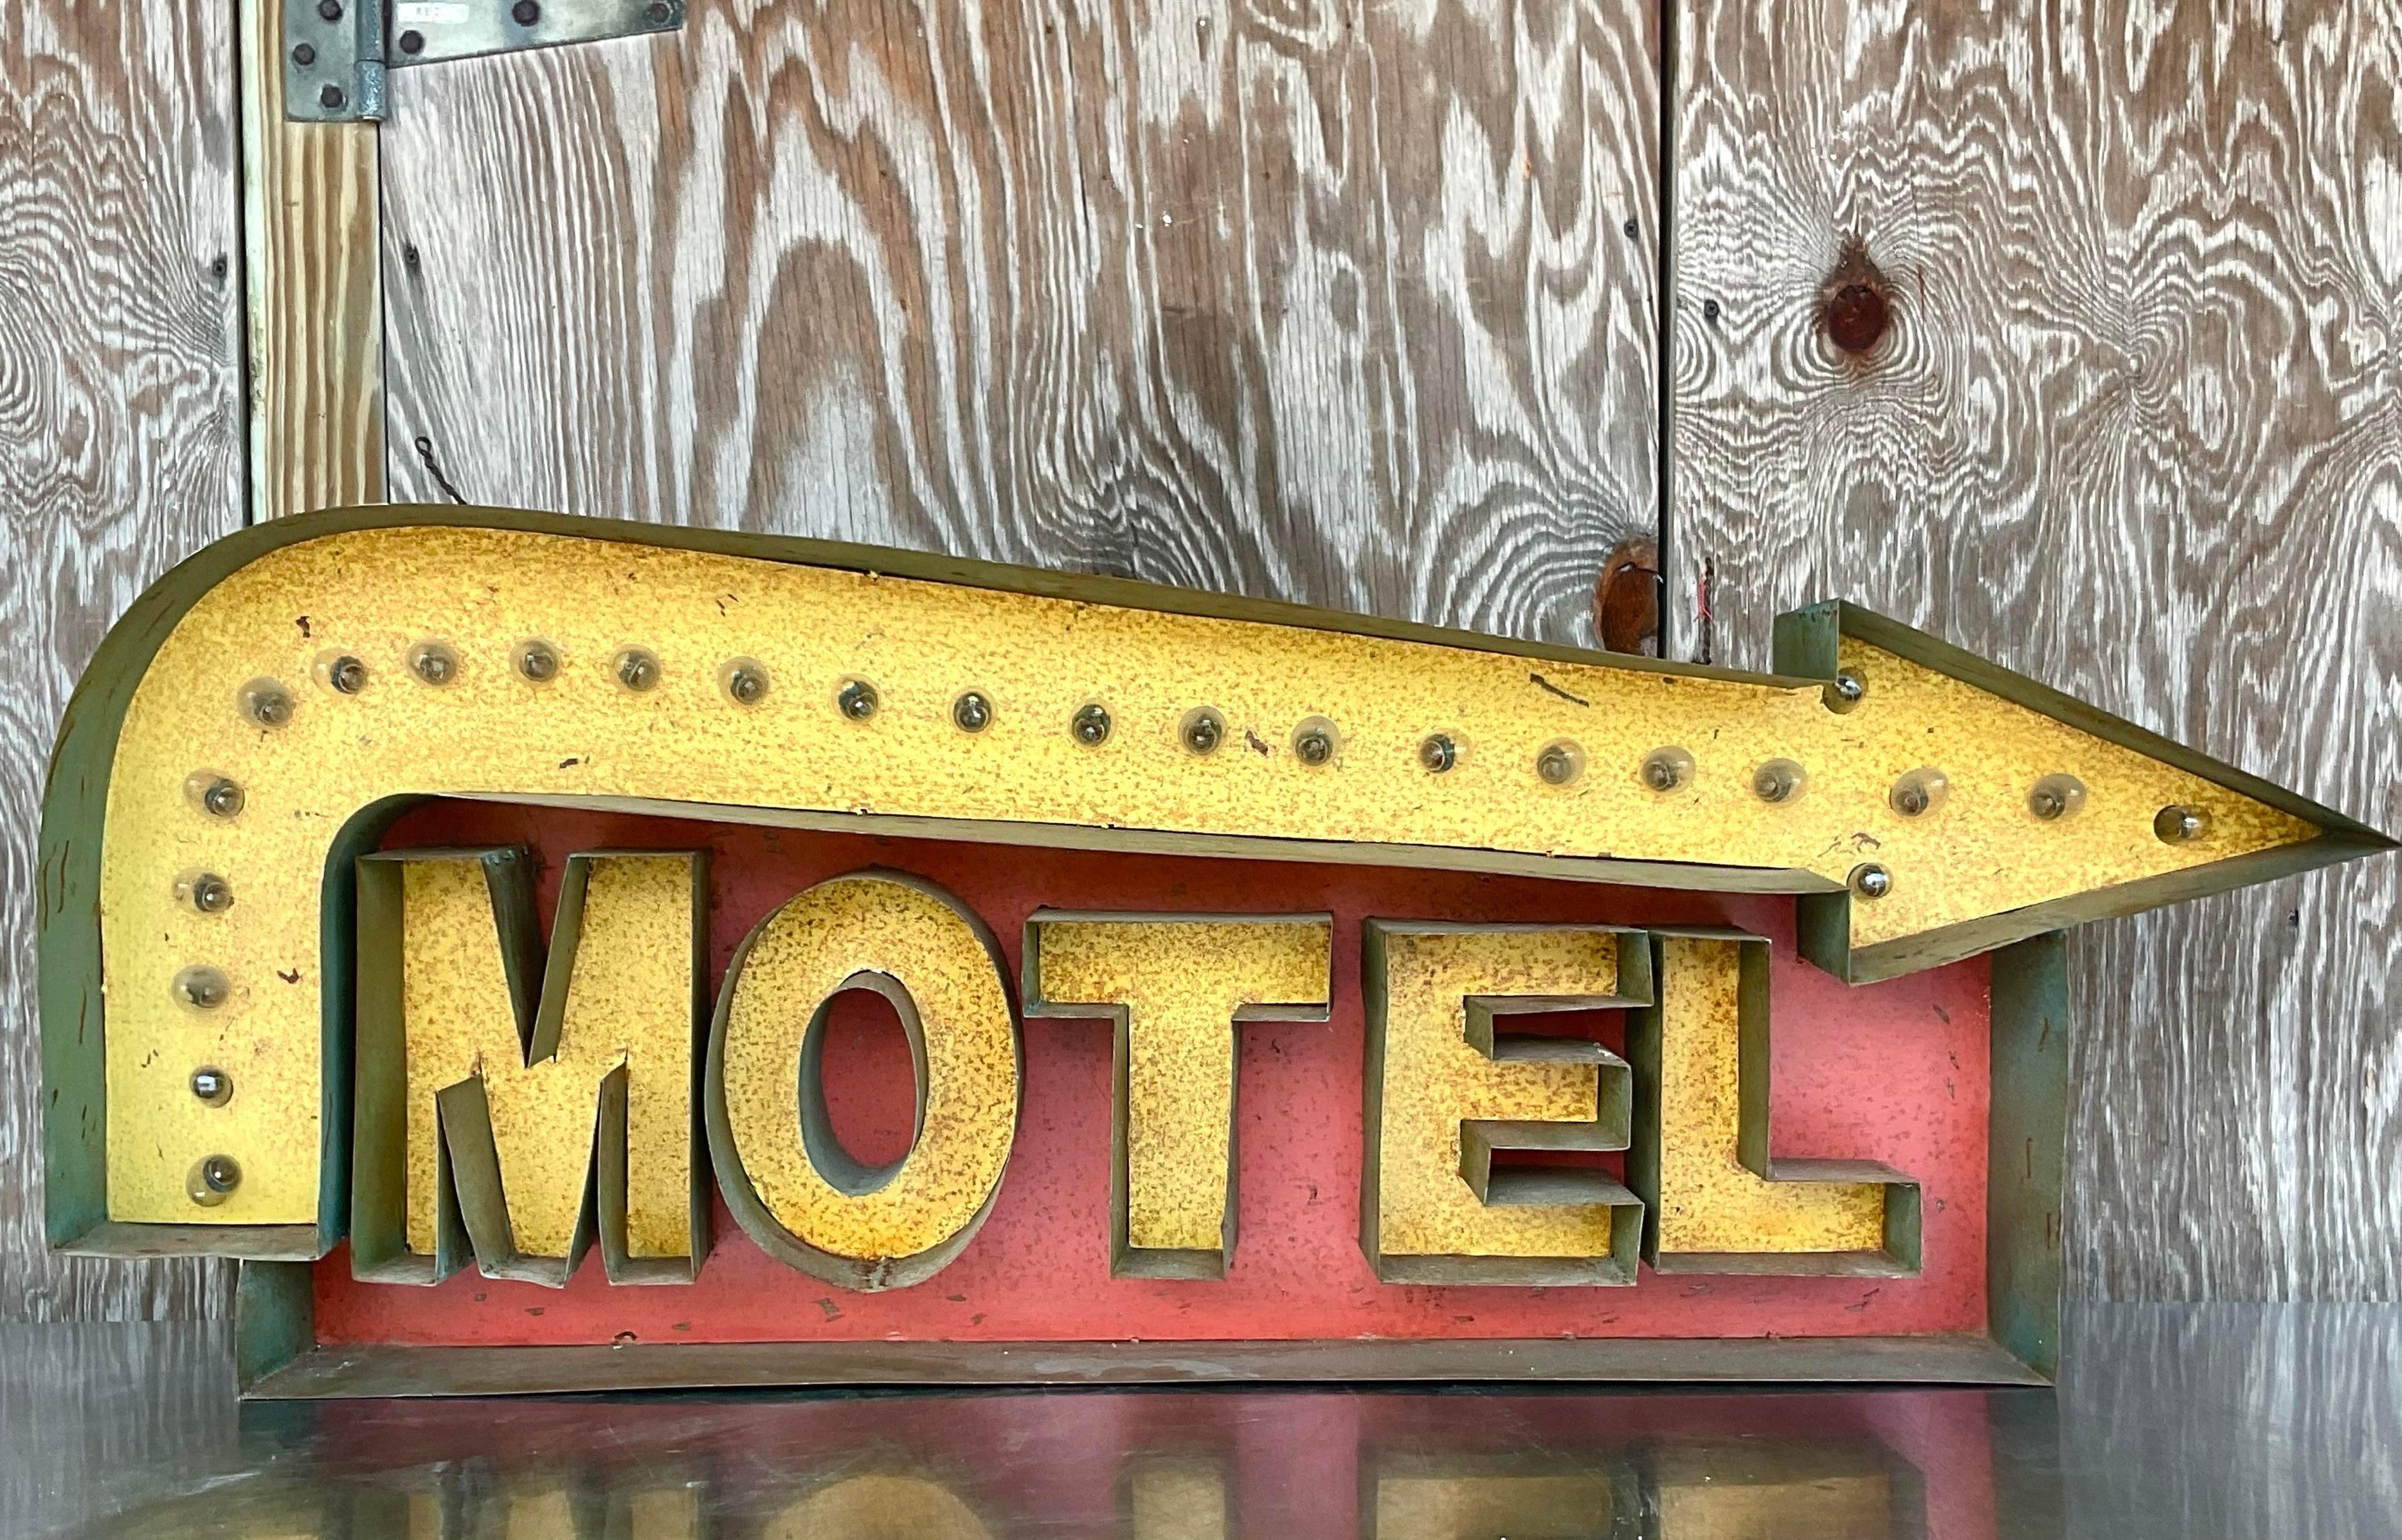 A fabulous vintage MCM motel sign. A classic direction sign with a row of lights. All over patina from time adds to the charm. Acquired from a Sarasota estate.